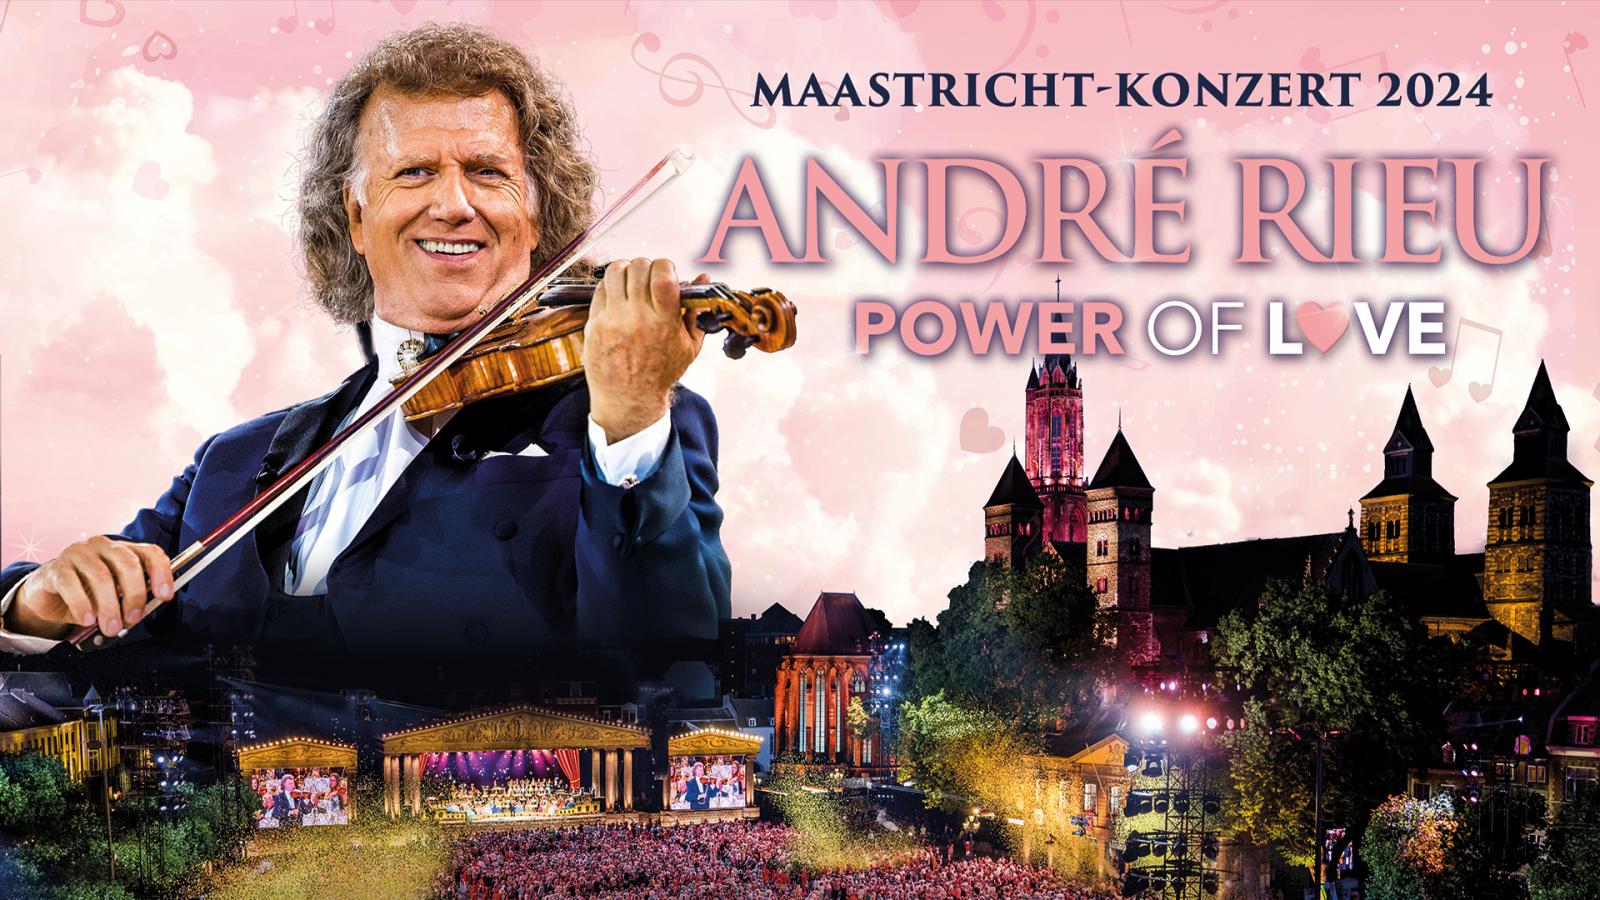 SPECIAL: André Rieu Power of Love